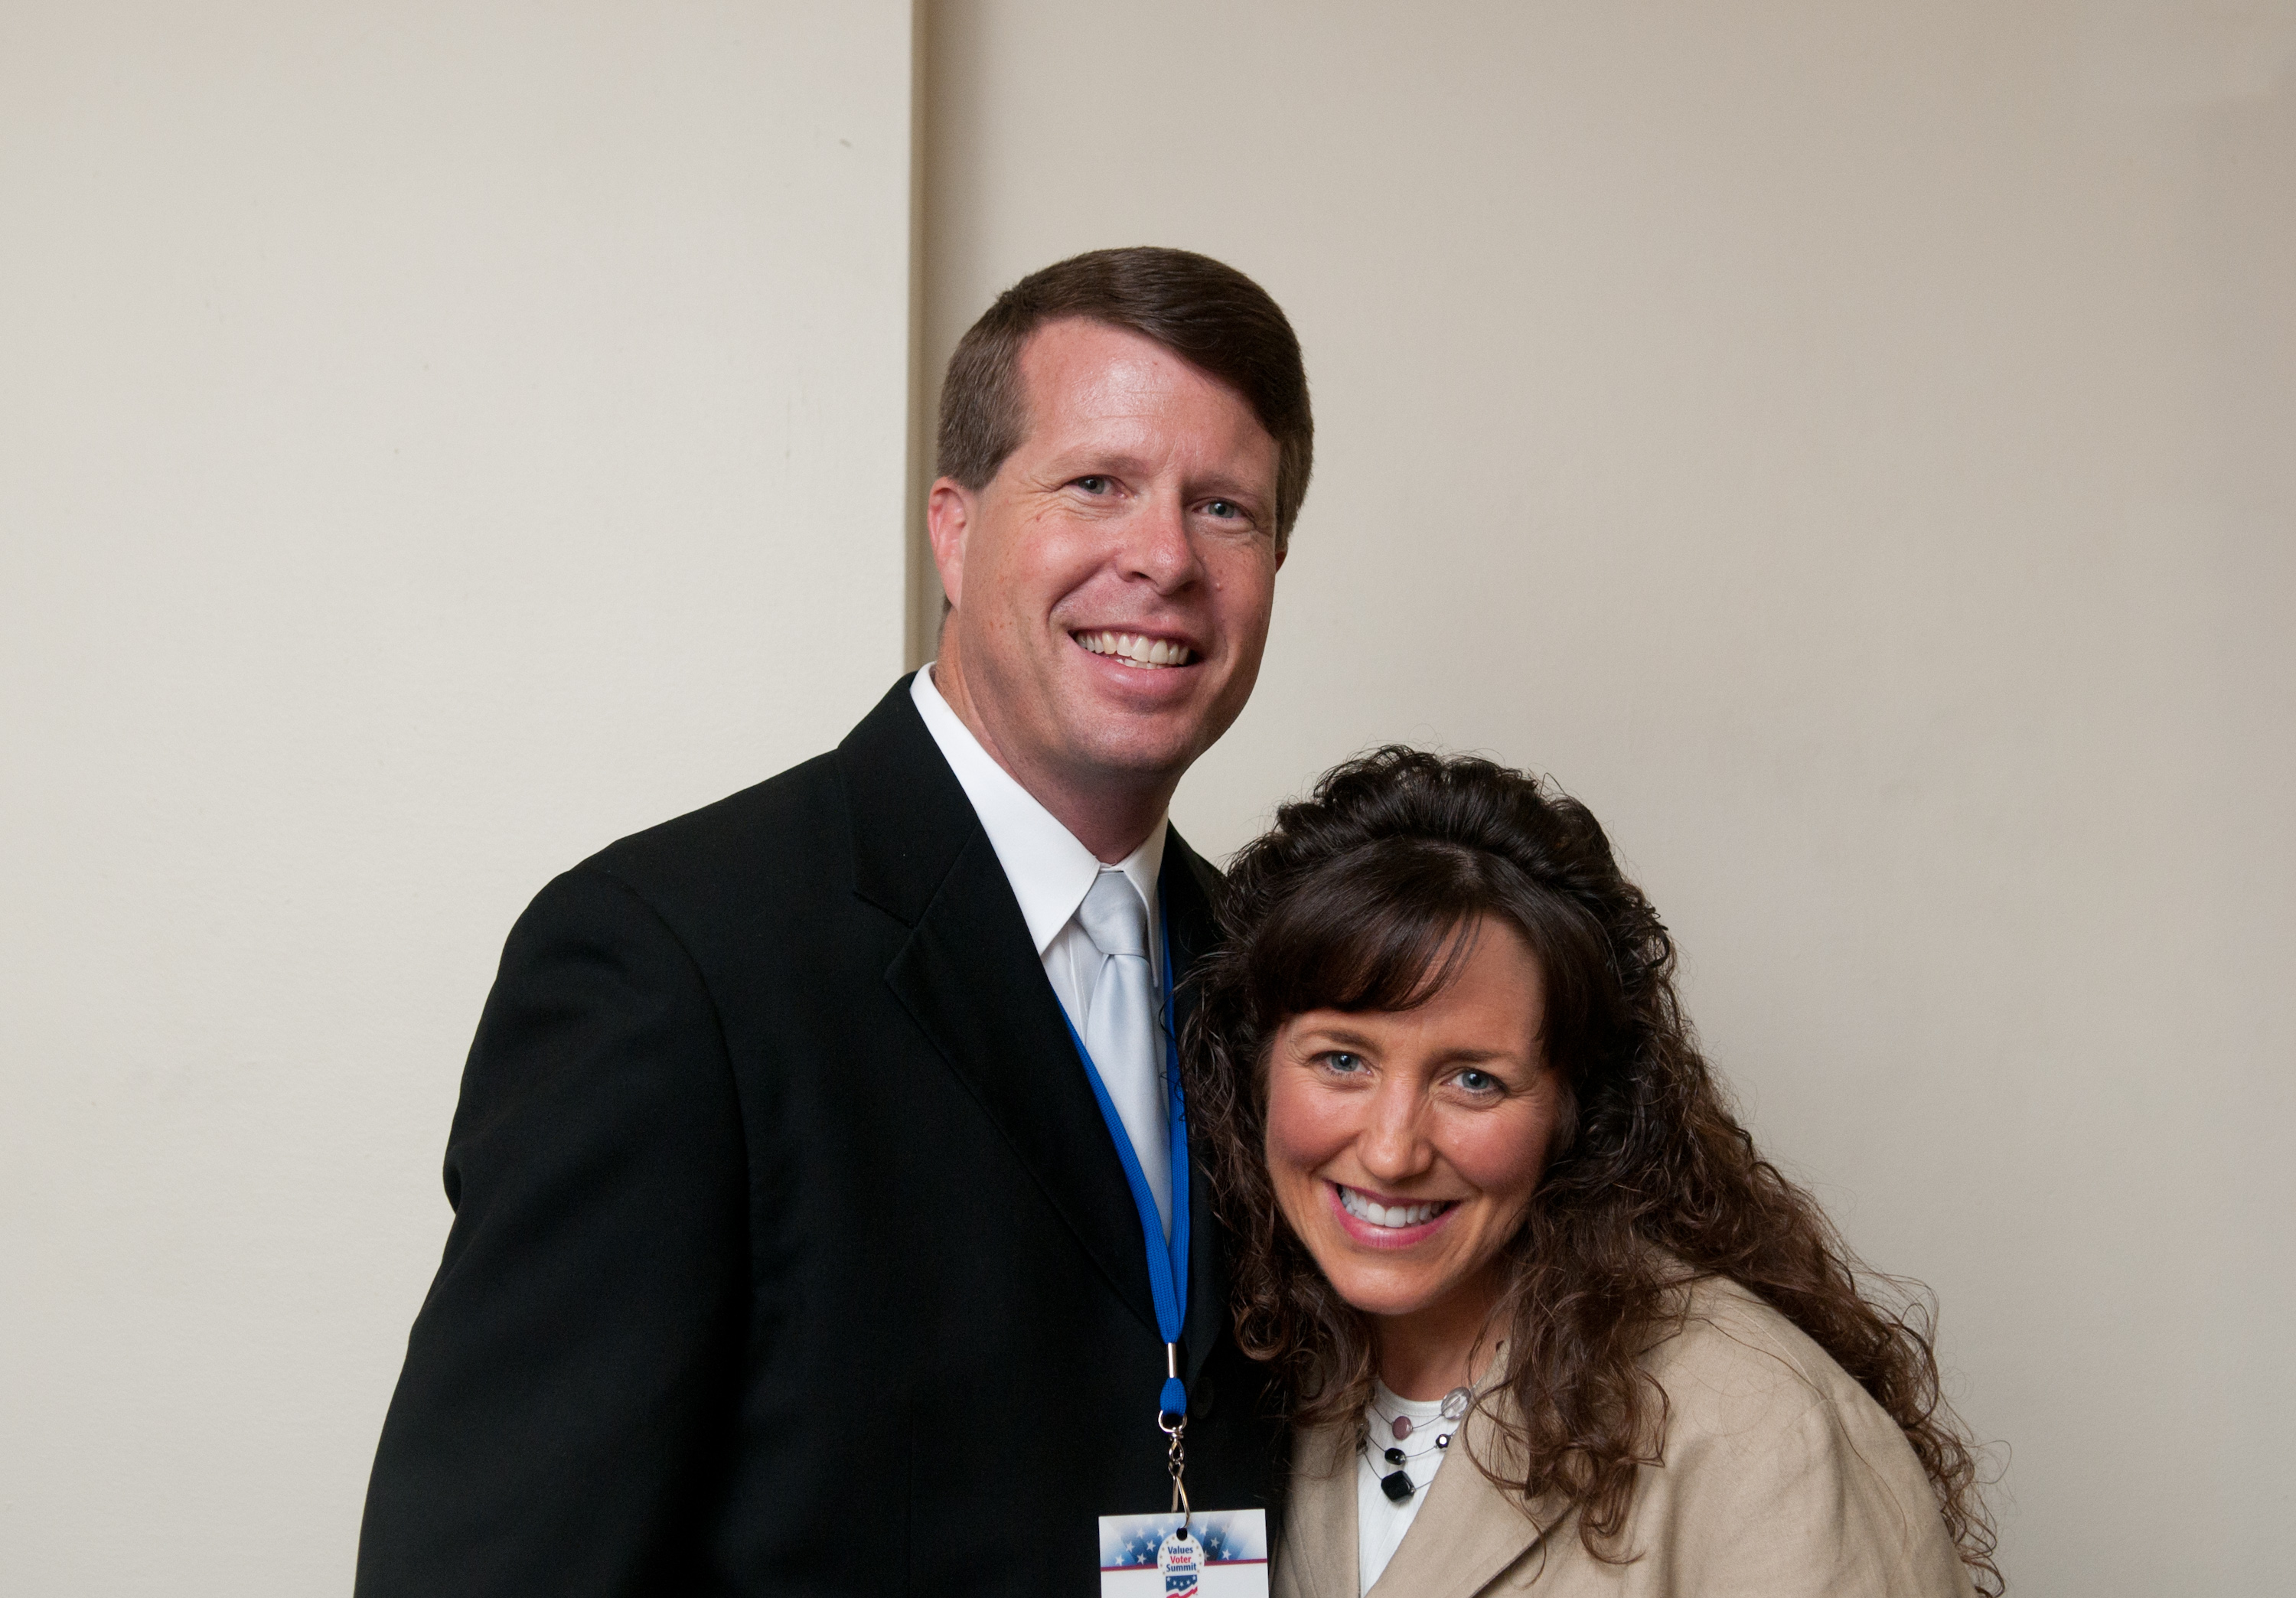 Jim Bob and Michelle Duggar poses for a photo together at the 5th Annual Values Voter Summit in 2010